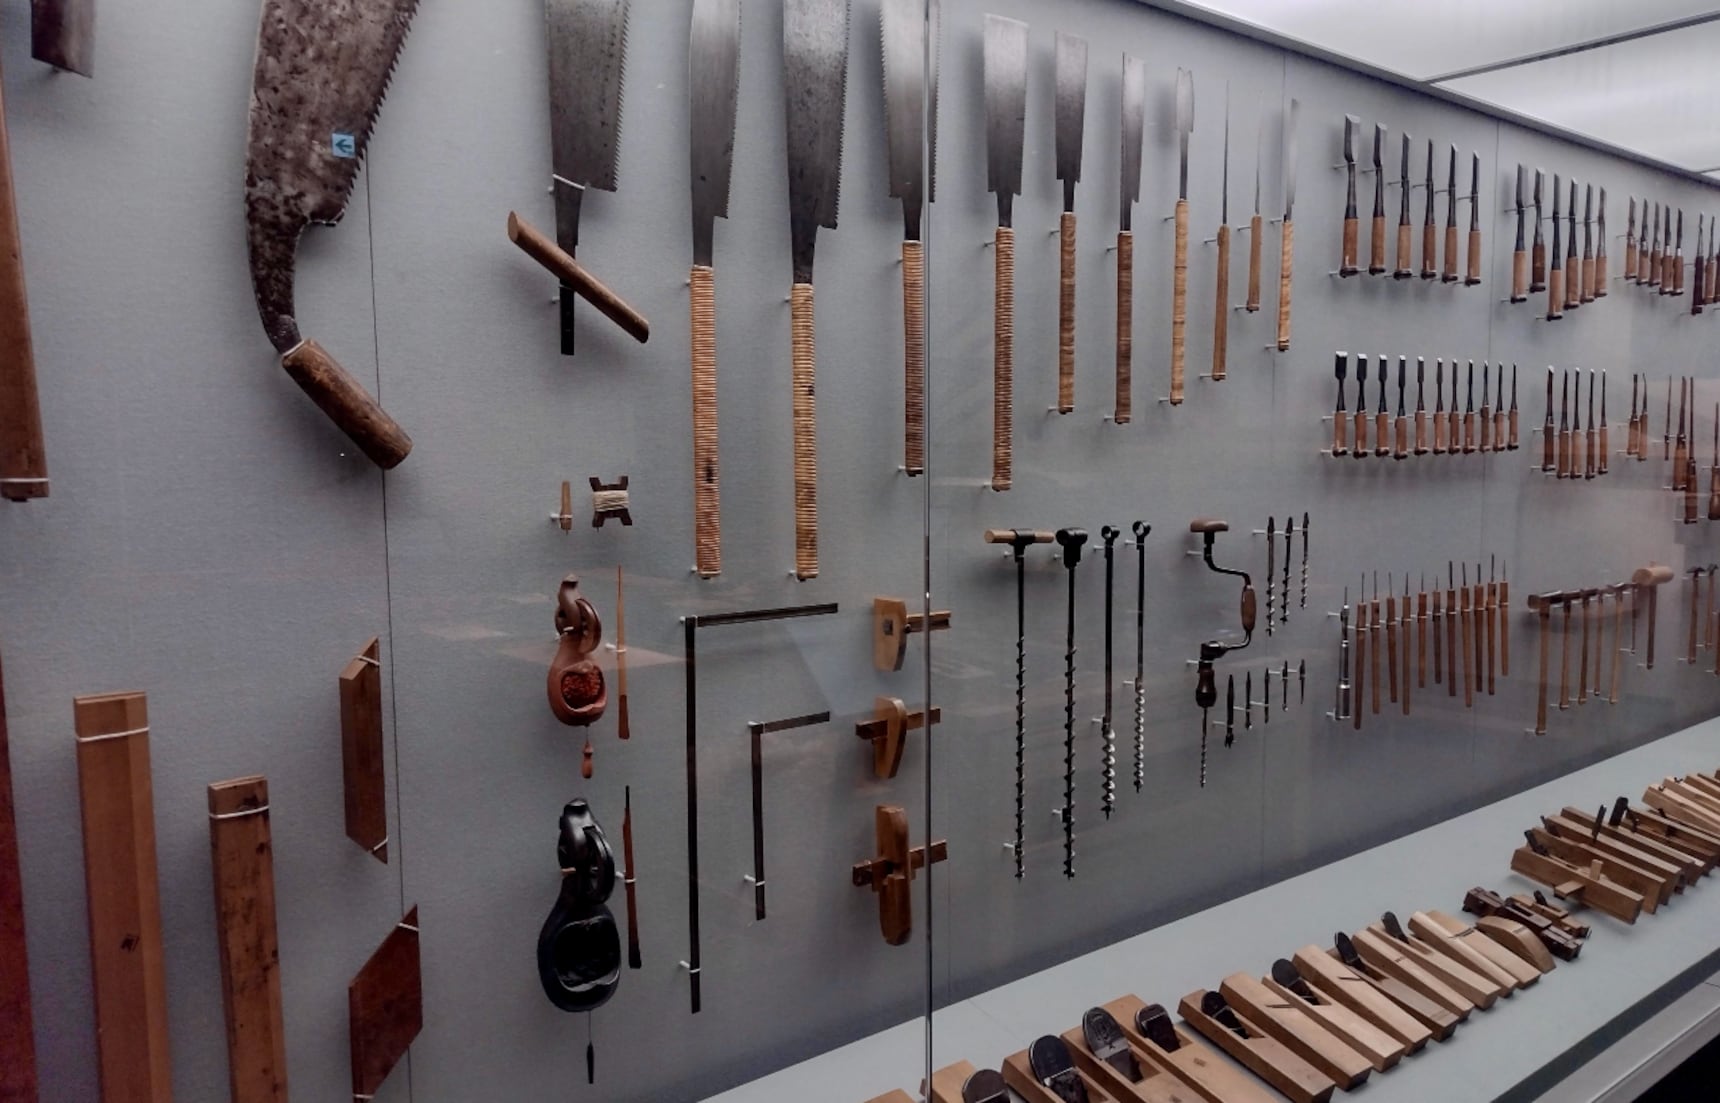 Discover Japanese Woodwork Traditions at Takenaka Carpentry Tools Museum